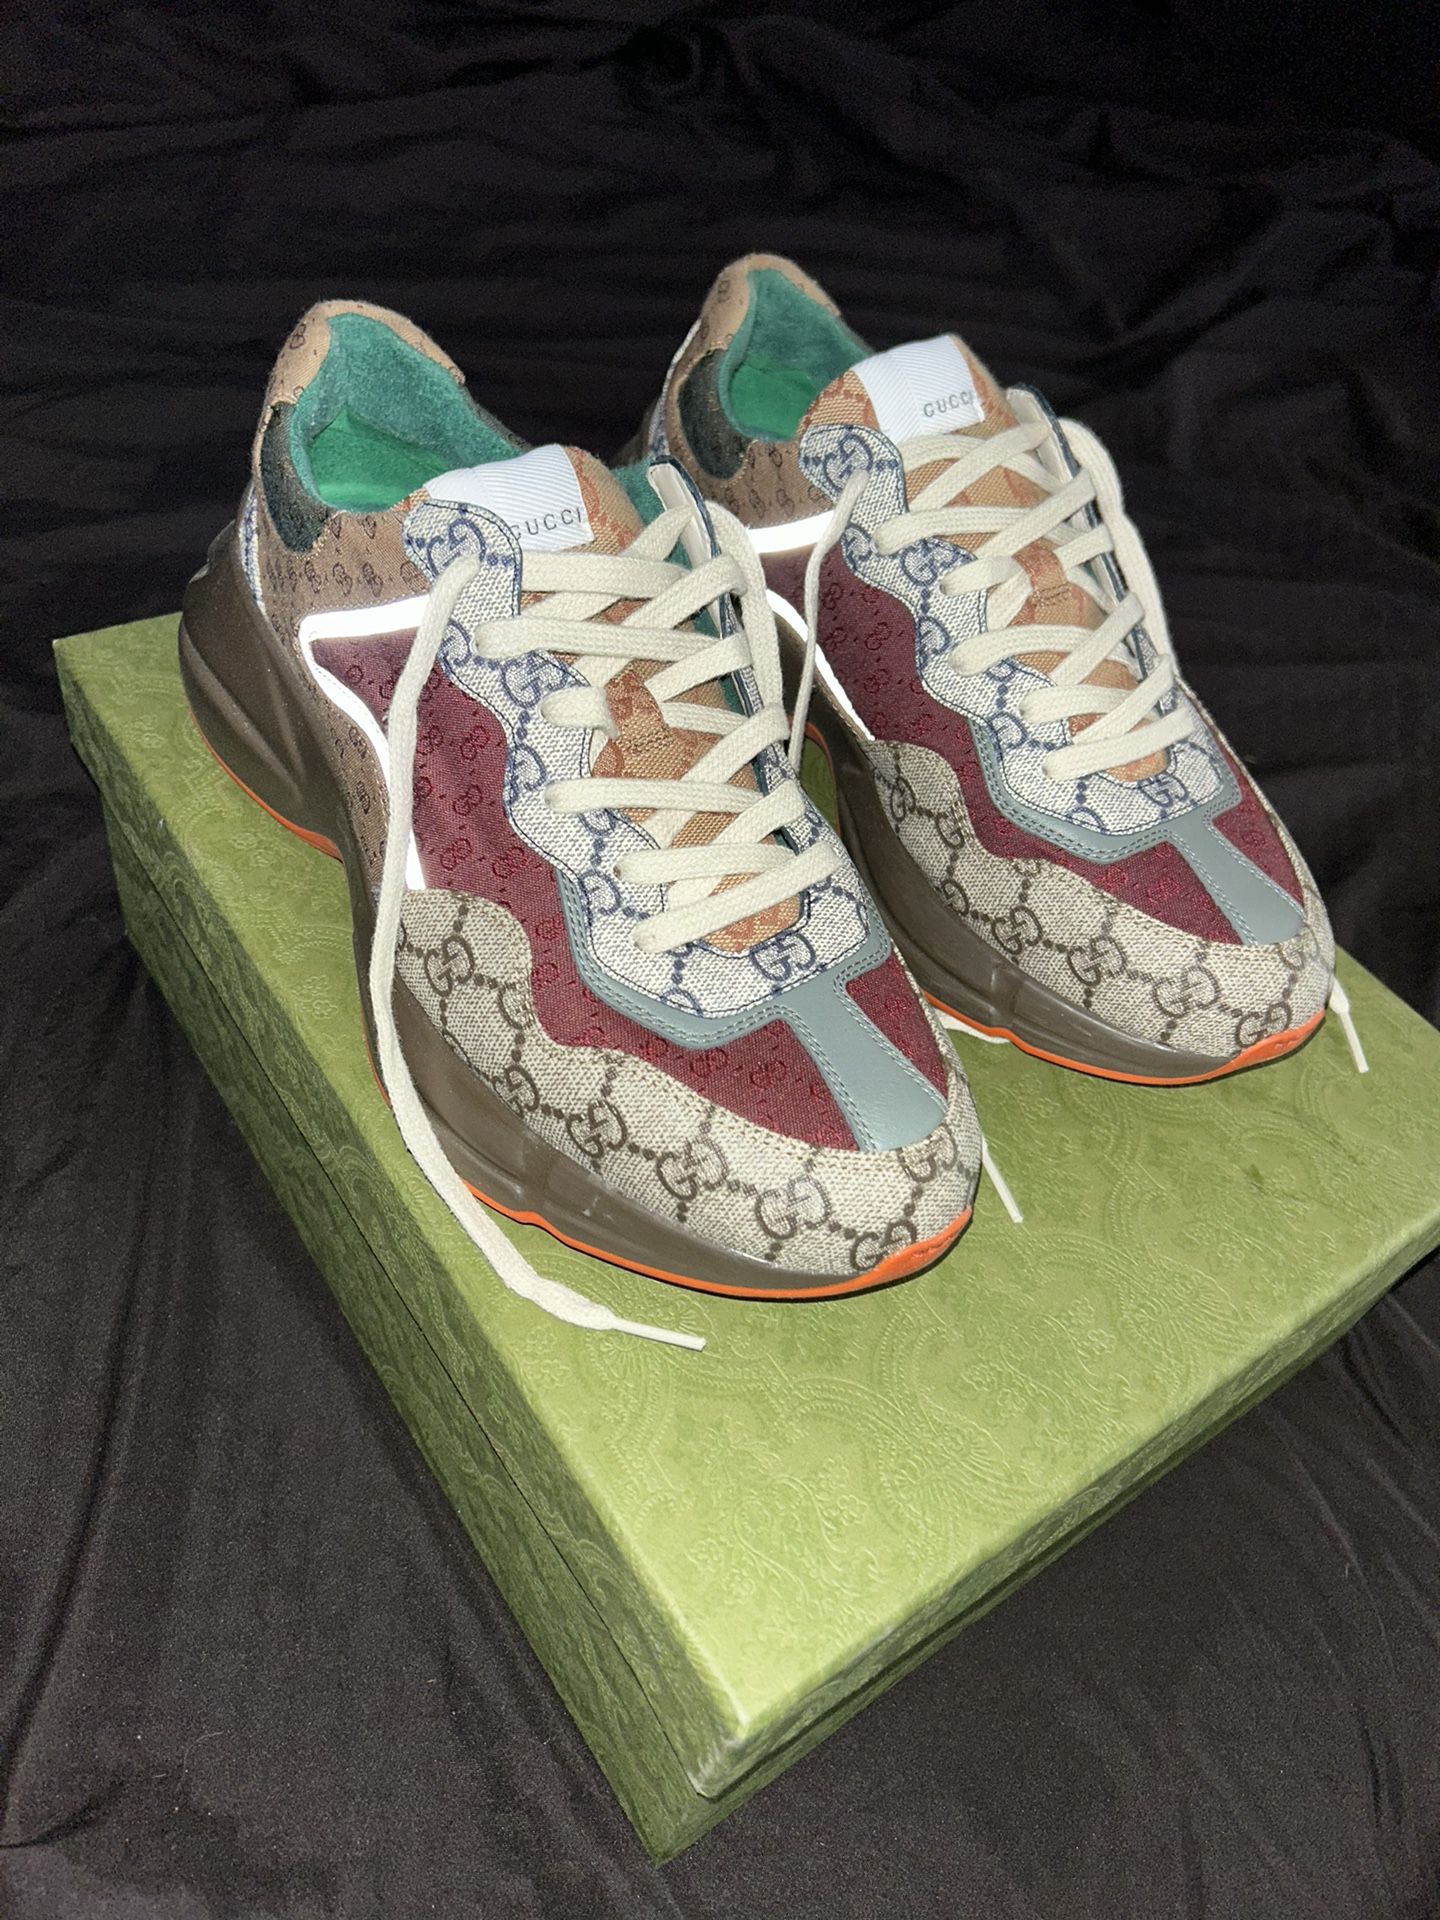 GUCCI Sneakers Men’s Size US 8